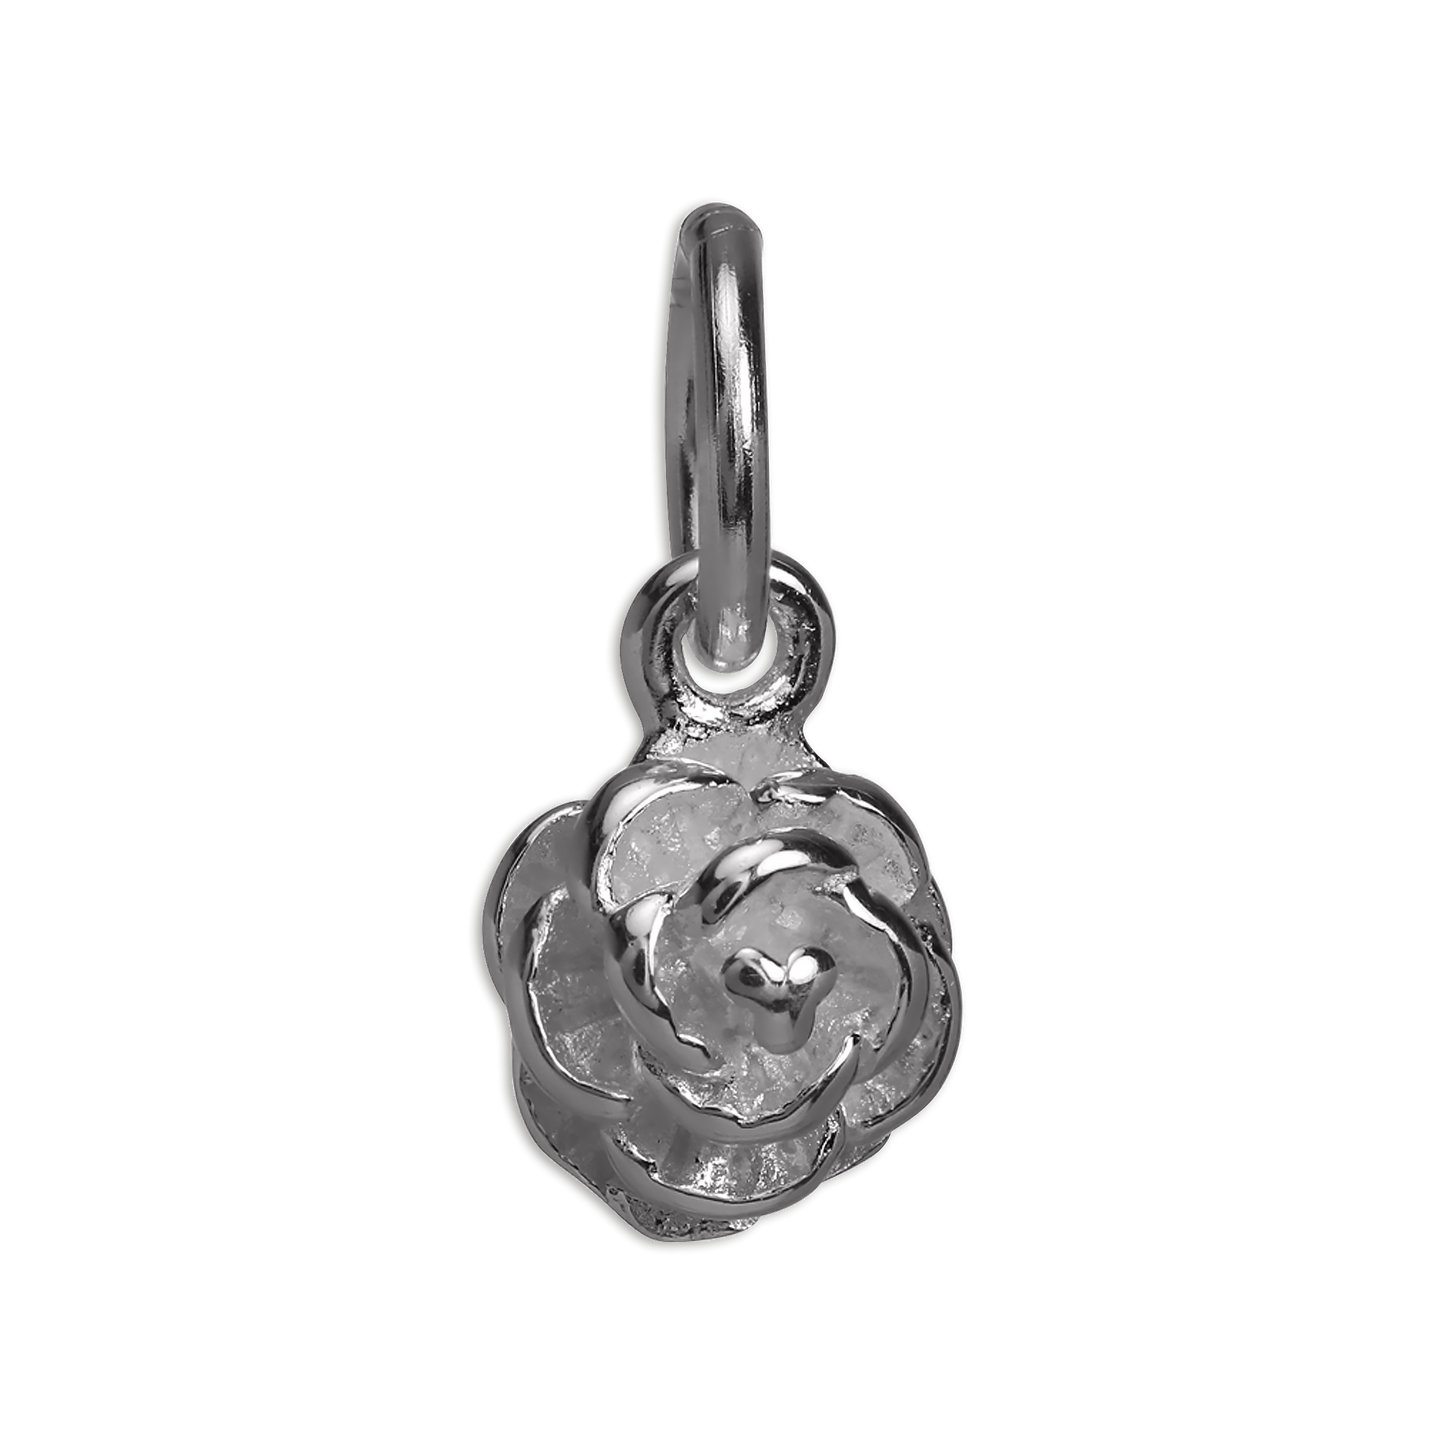 Small Sterling Silver Rose Bud Charm